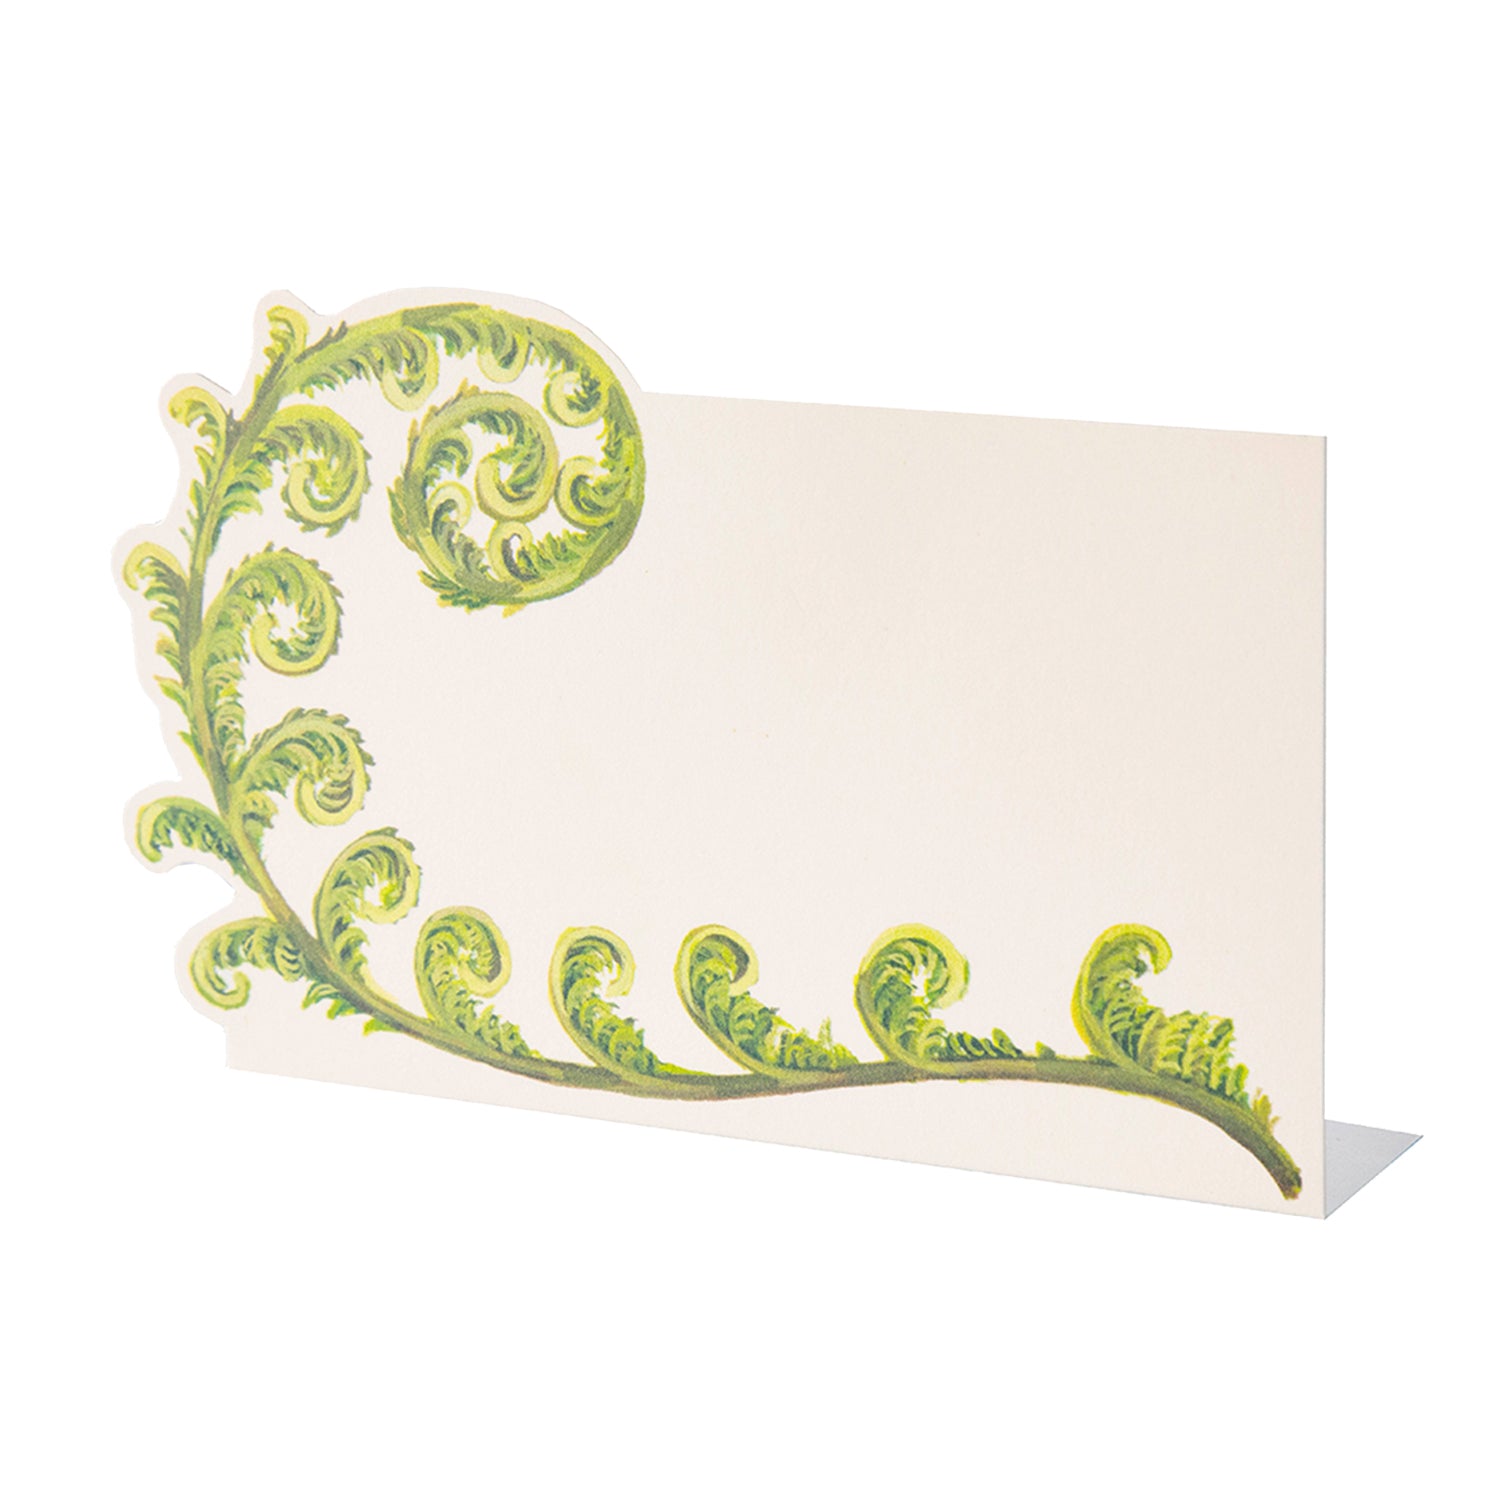 A Hester &amp; Cook Fiddlehead Fern Place Card with writing space.